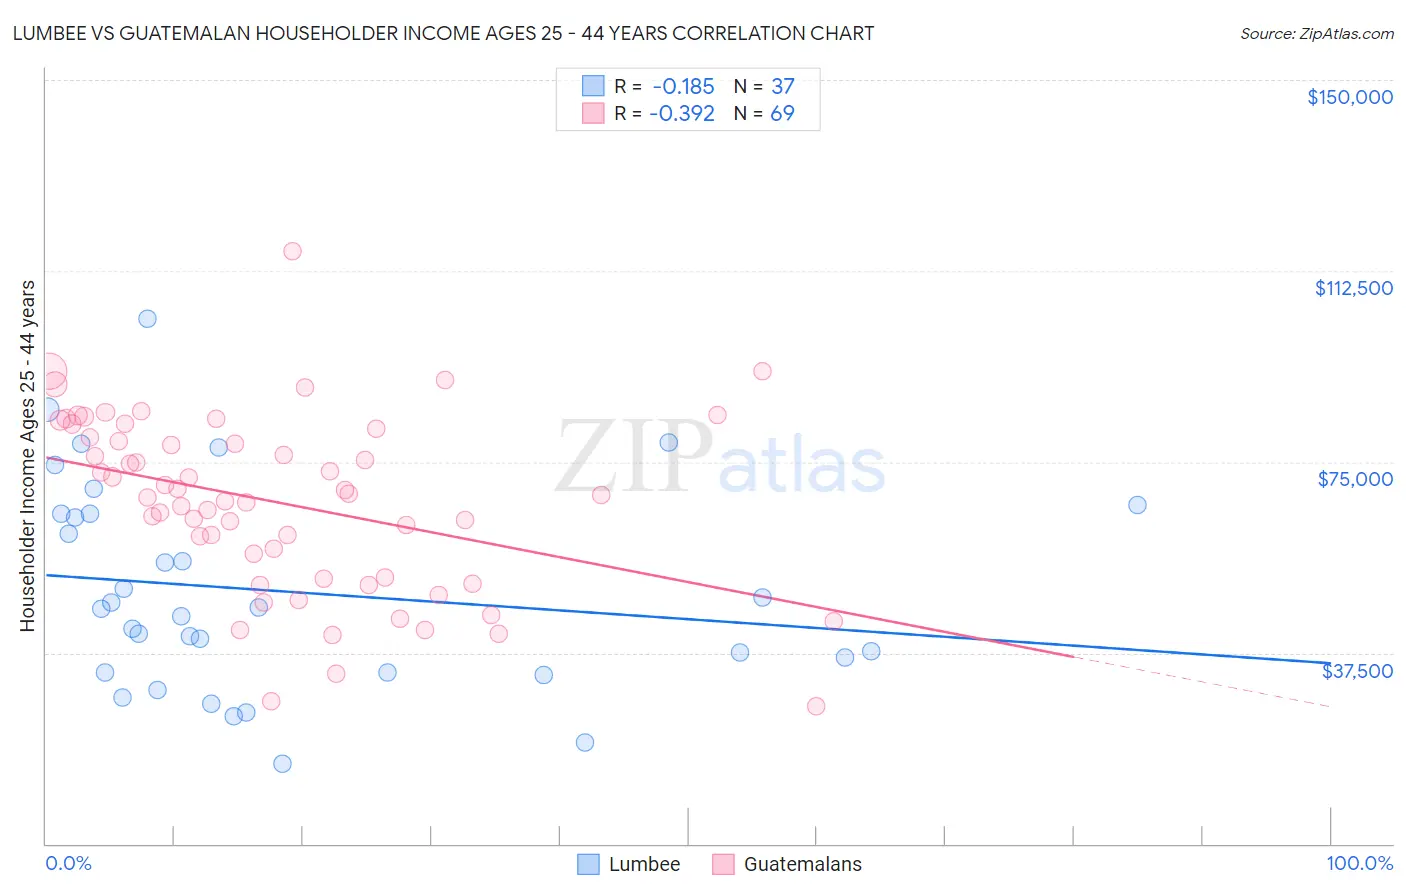 Lumbee vs Guatemalan Householder Income Ages 25 - 44 years